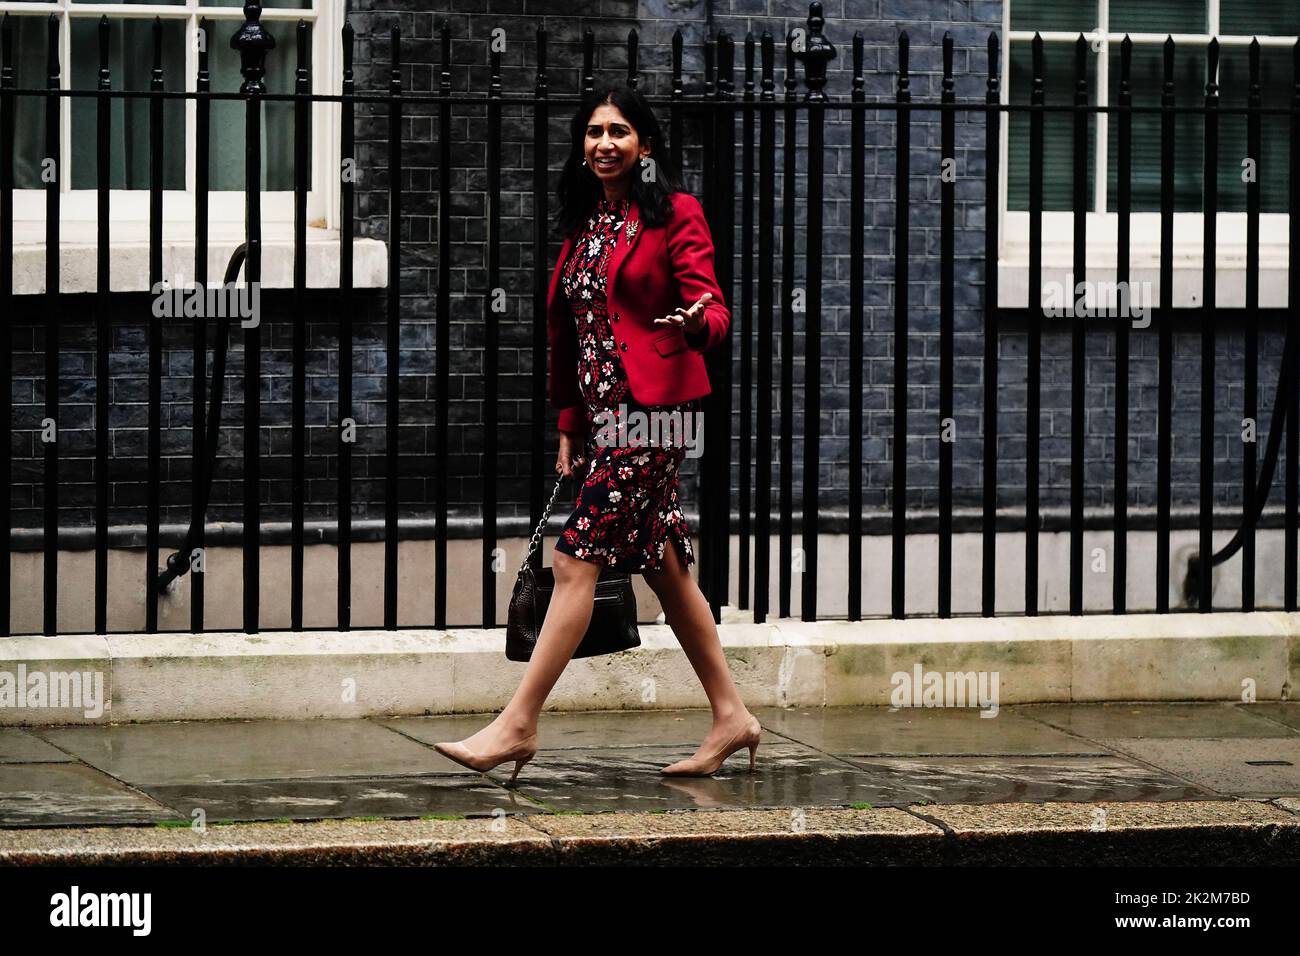 Home Secretary Suella Braverman arrives for a cabinet meeting at 10 Downing Street, London, ahead of a mini-budget announcement by Chancellor of the Exchequer Kwasi Kwarteng. Picture date: Friday September 23, 2022. Stock Photo